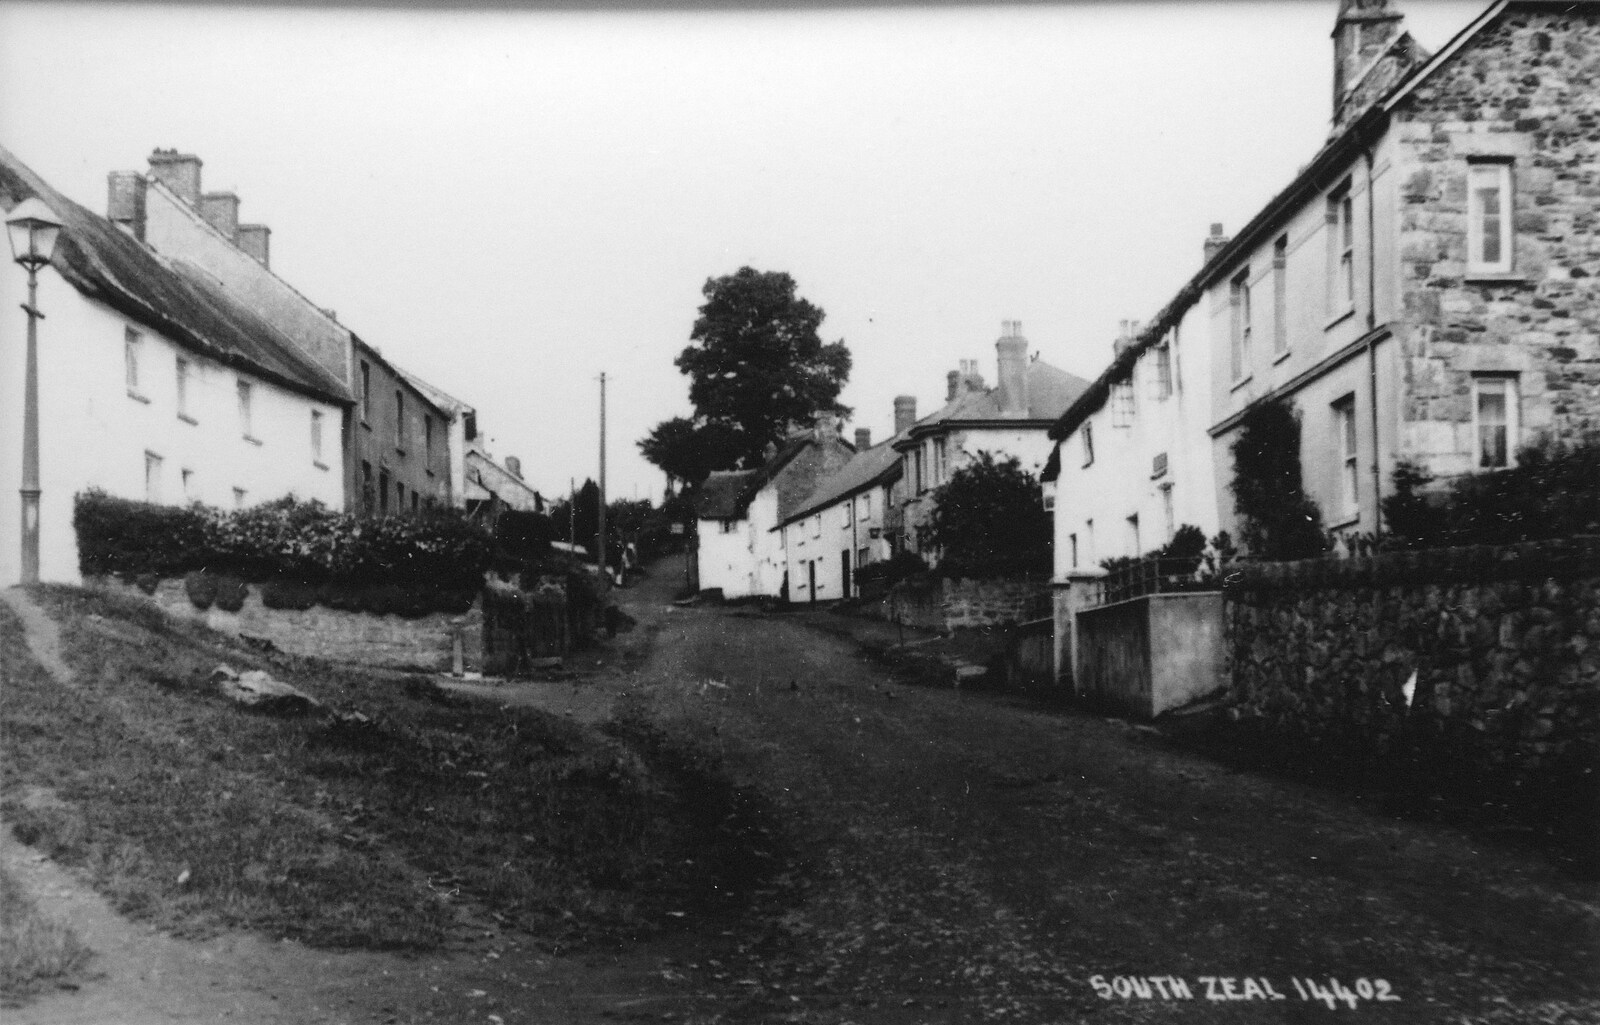 Our cottage, on the right, in the 1800s from Easter in South Zeal and Moretonhampstead, Devon - 9th April